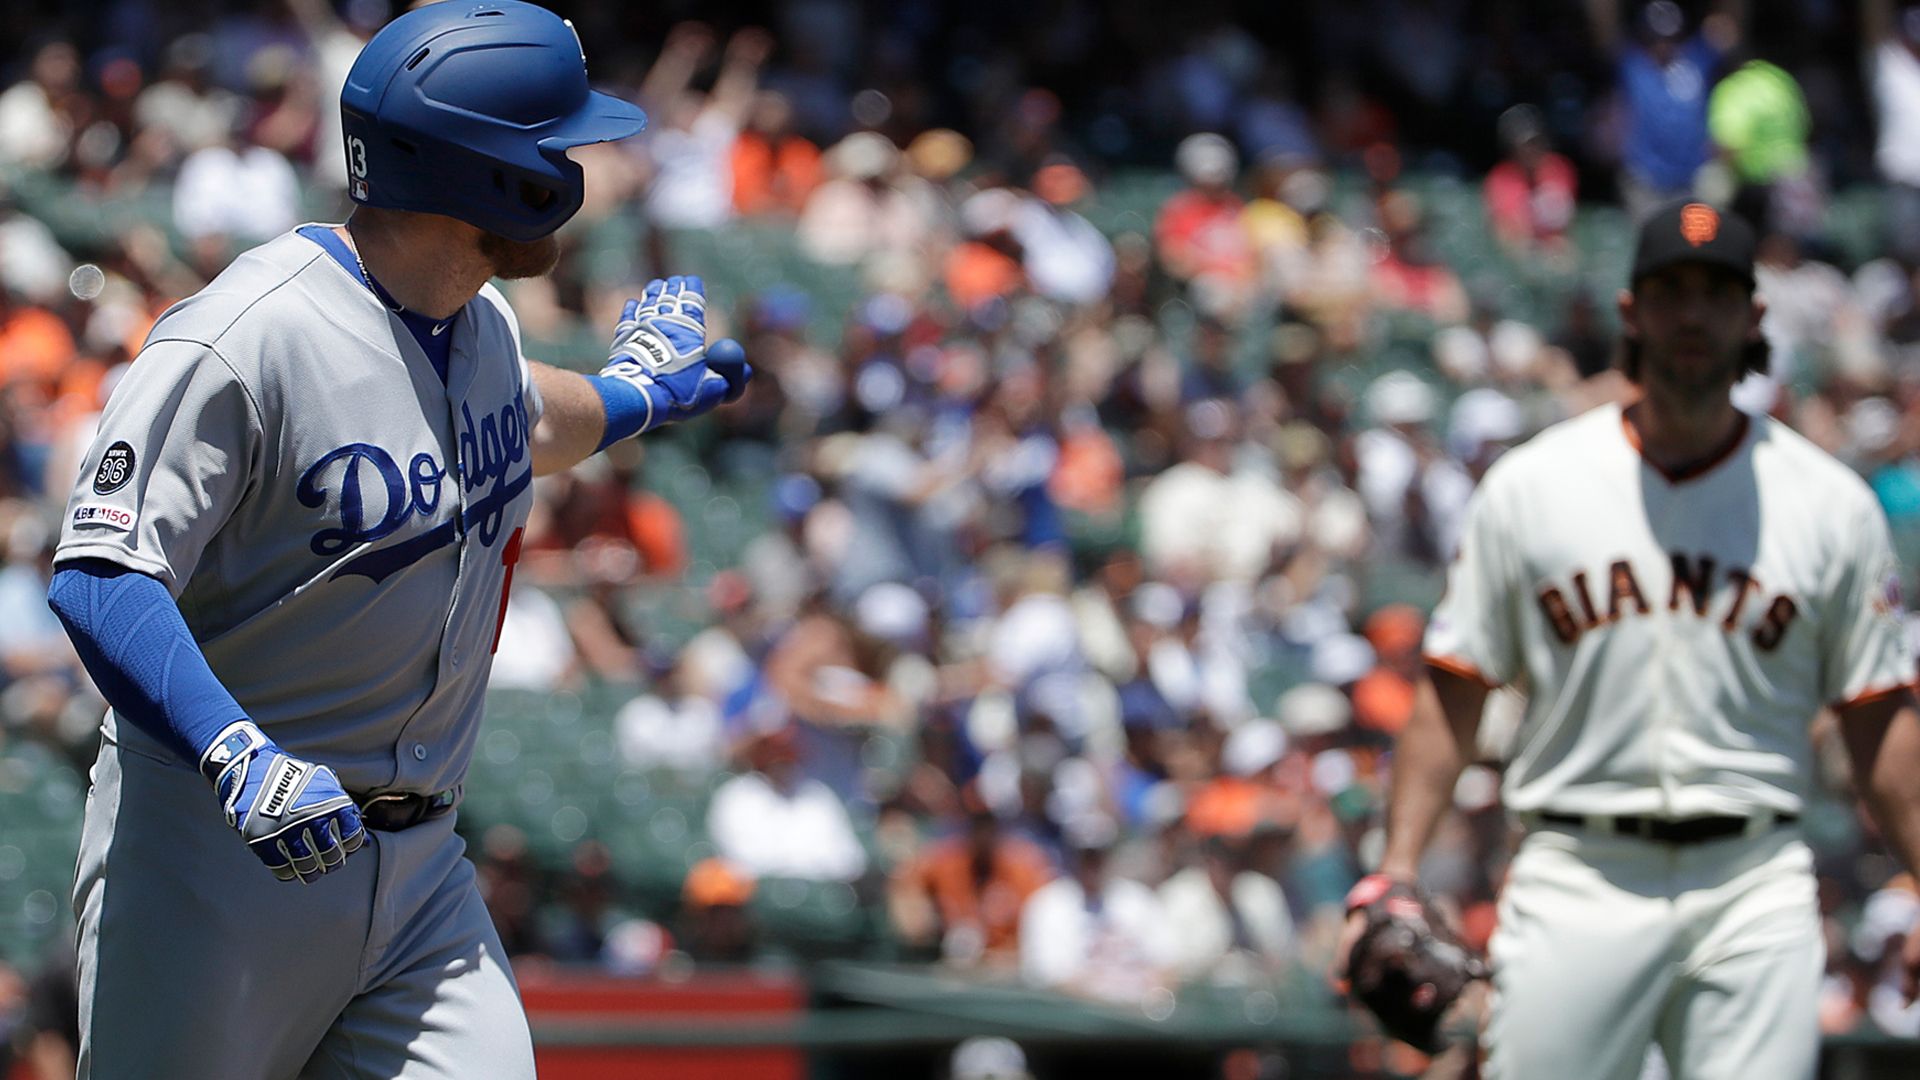 Max Muncy keeps 'poking the bear' before rematch with Madison